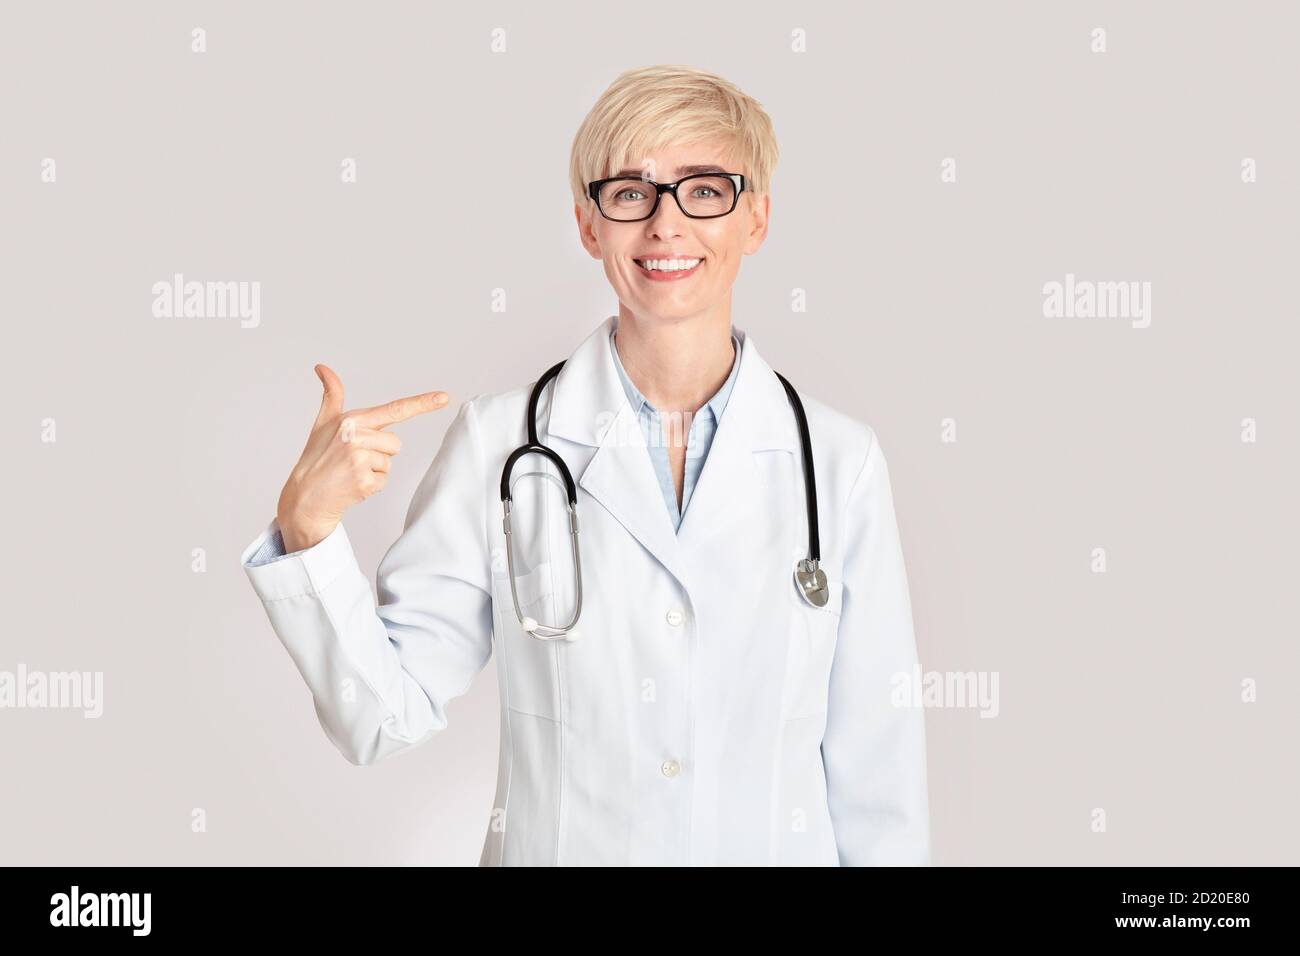 Medical professionals and prevention of disease. Smiling middle aged woman doctor points at herself with finger Stock Photo